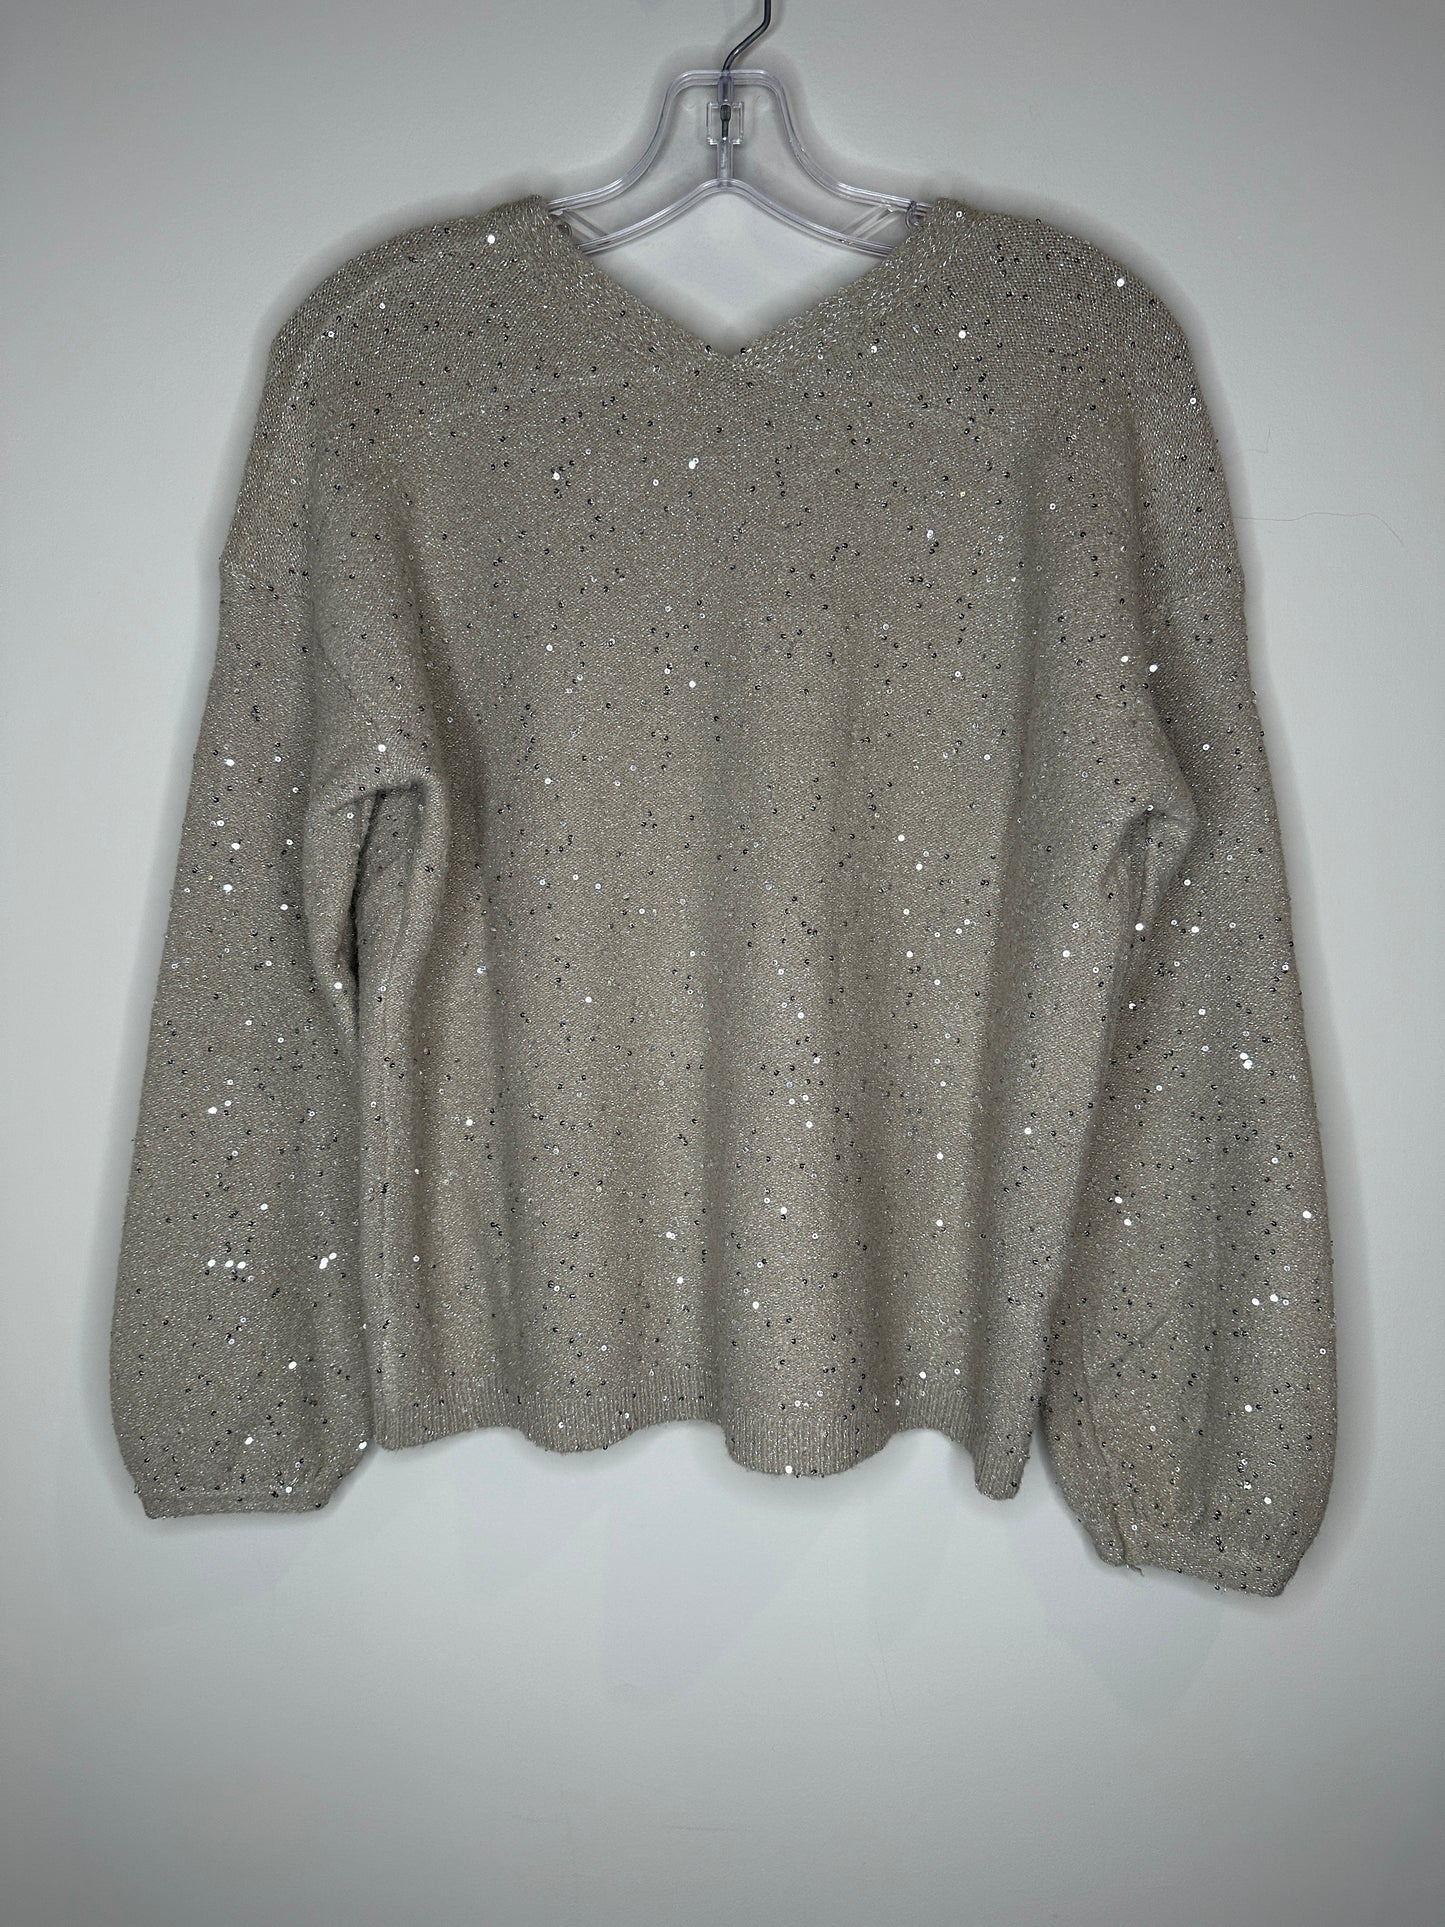 LOFT Size M Taupe V-Neck Sequined Sweater